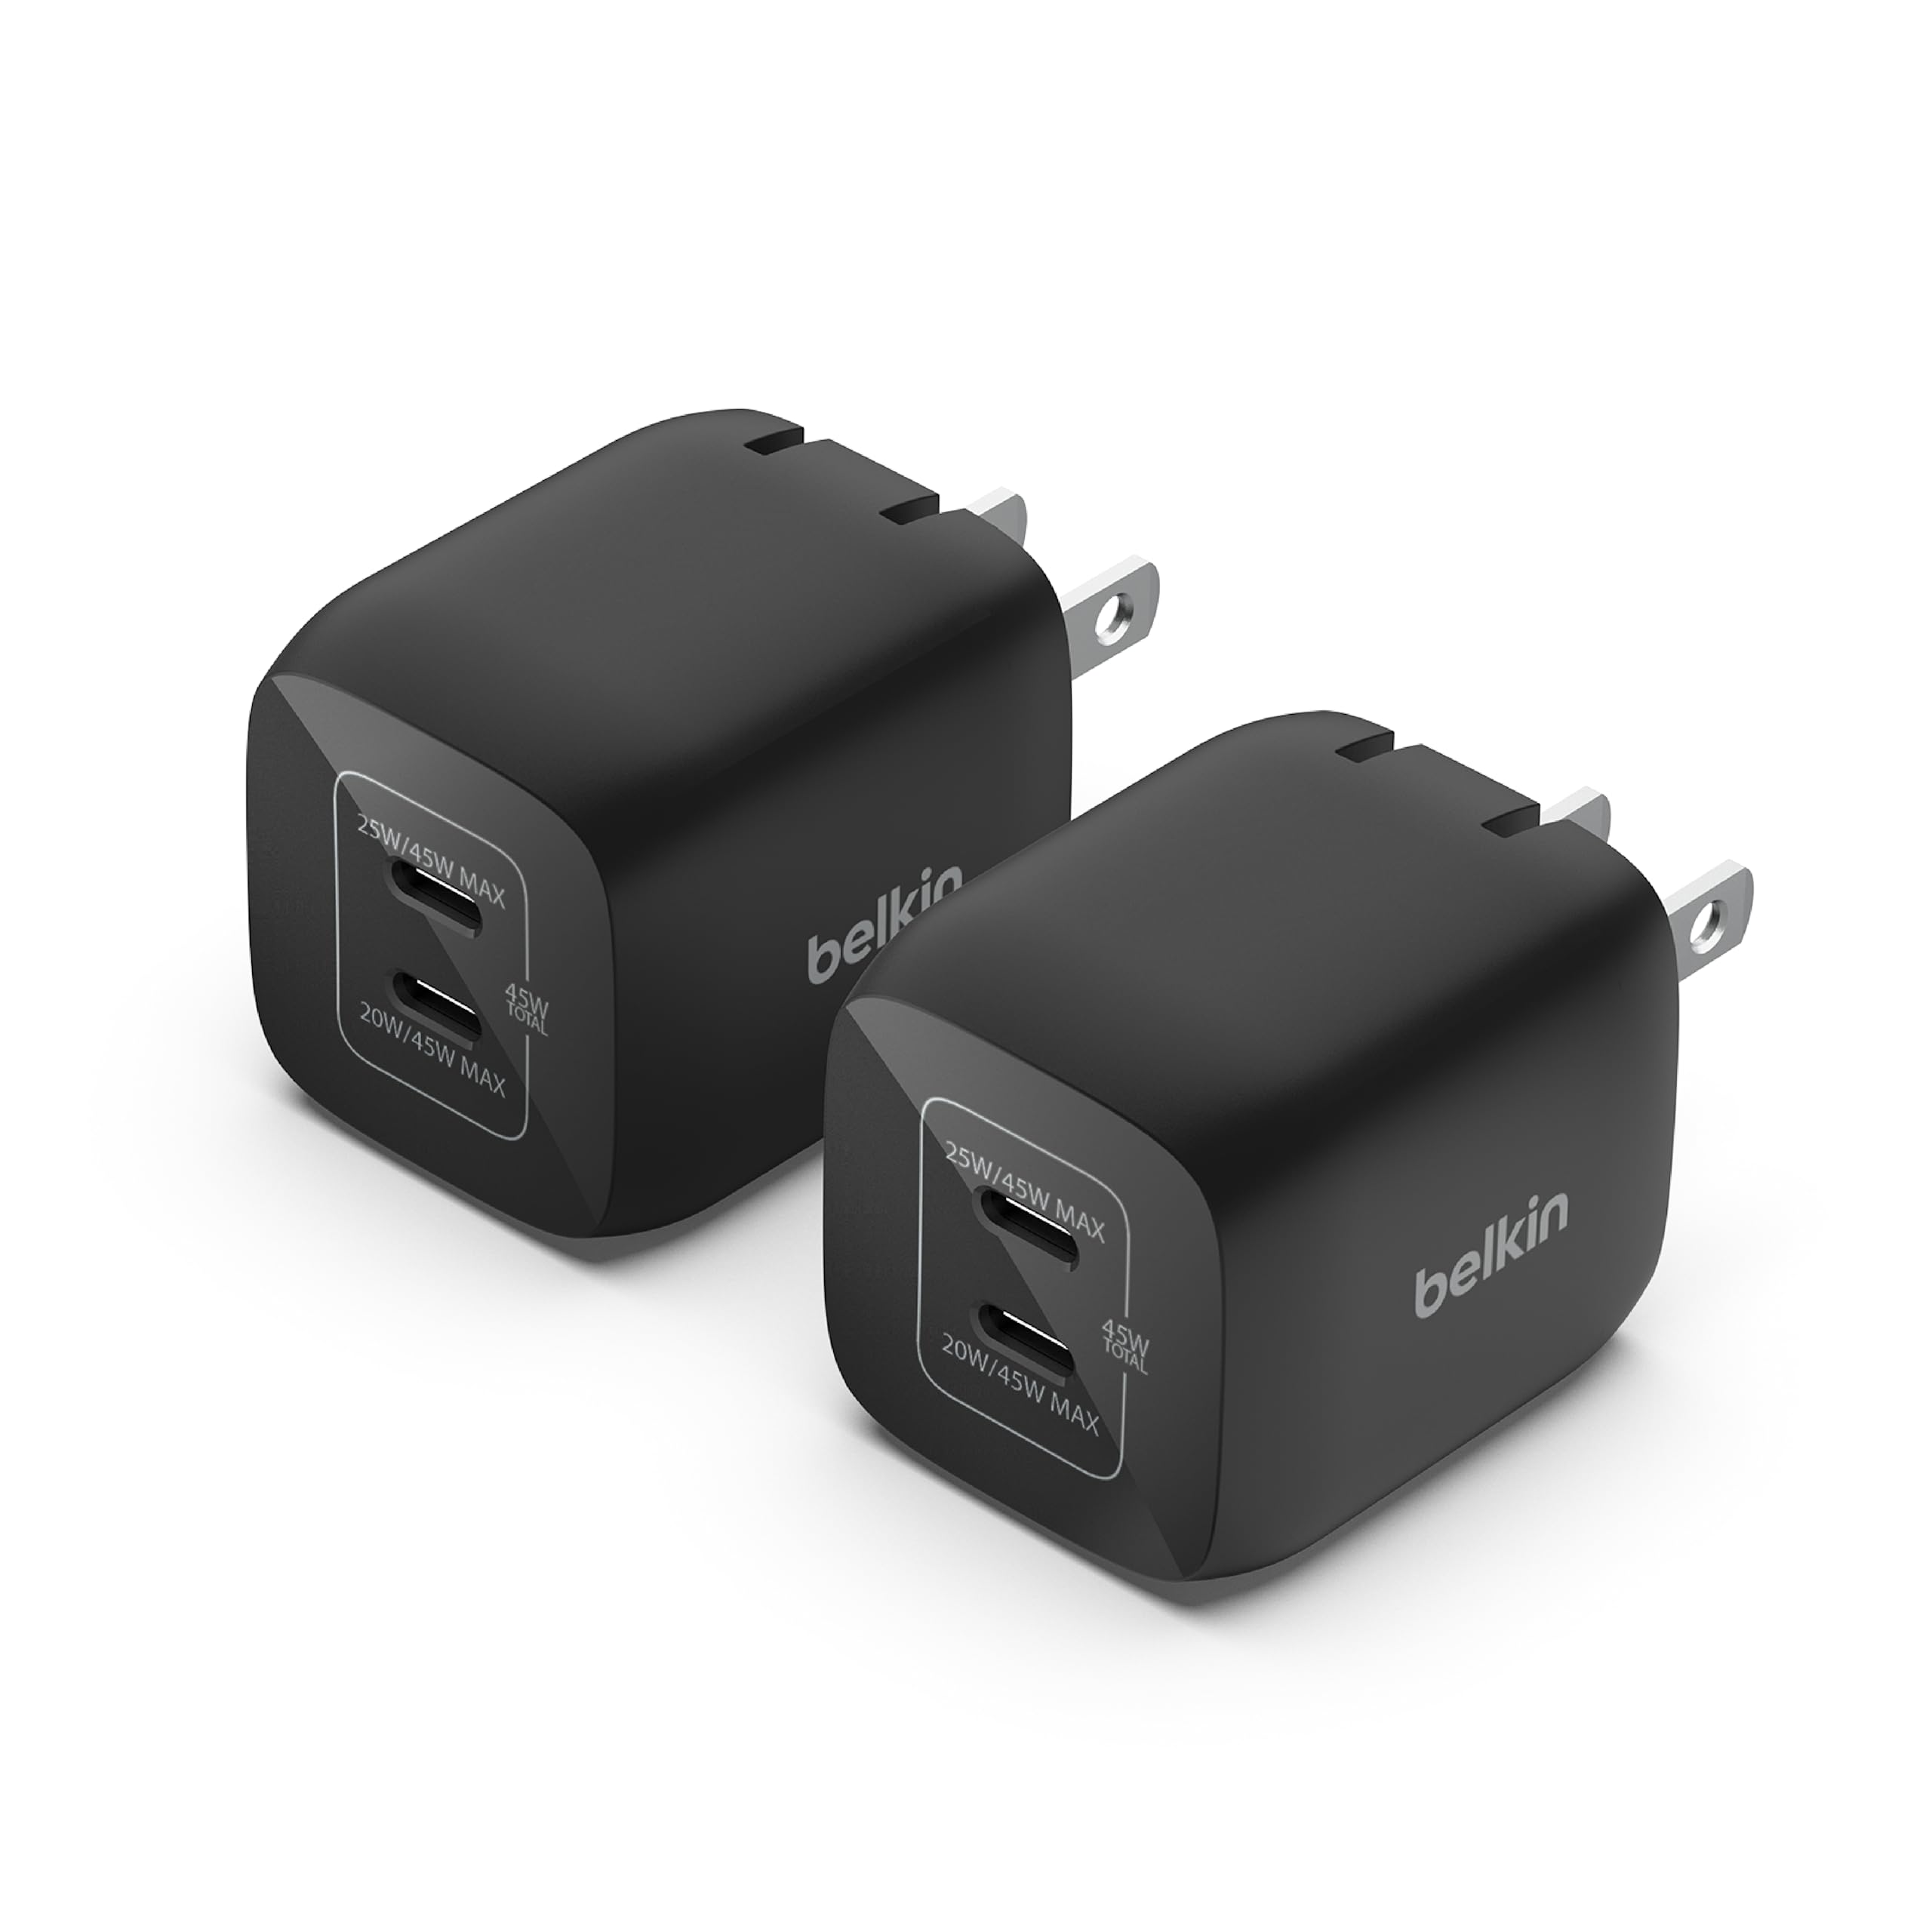 Belkin 45W Dual USB-C Wall Charger, Fast Charging Power Delivery 3.0 w/GaN Technology, iPhone 14, 13, Pro, Pro Max, Mini, iPad Pro 12.9, MacBook, Galaxy S23, S23+, Ultra, Tablet - Black (2-Pack)